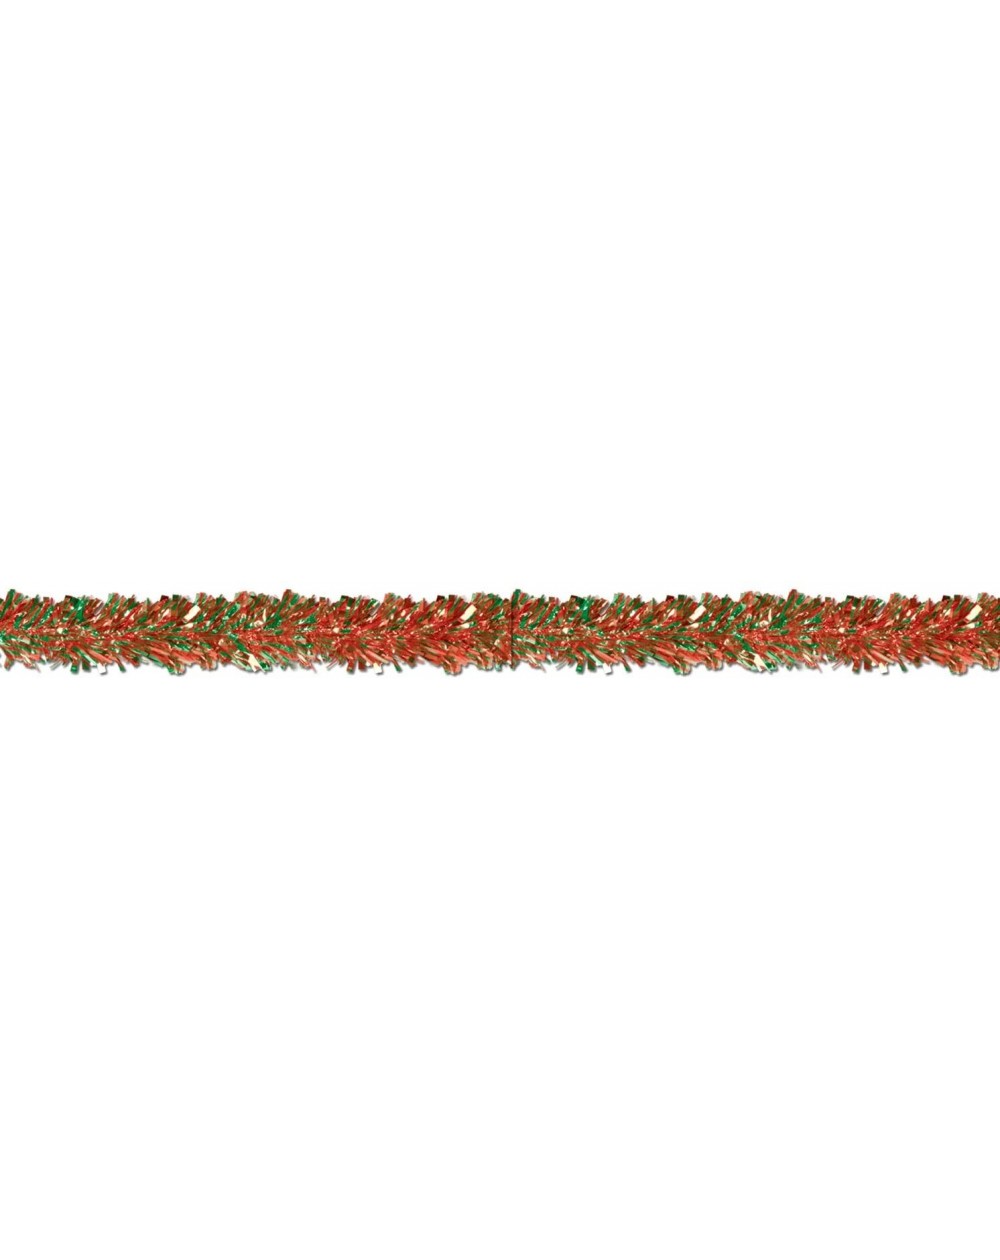 Banners & Garlands Metallic Festooning Garland Christmas Party Supplies- Hanging Decorations- 4" x 15'- Red/Green - Red/Green...